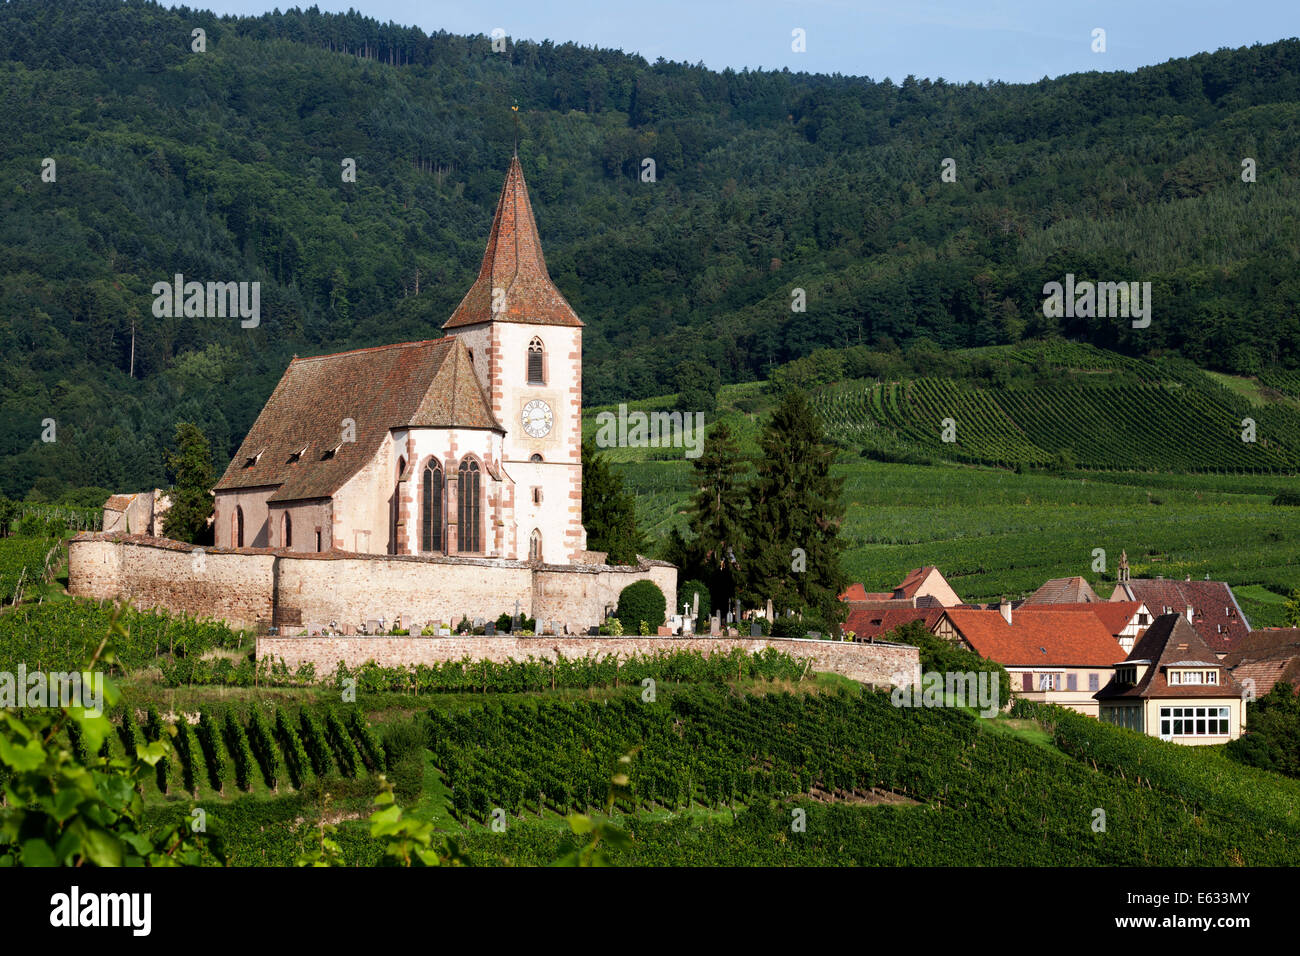 Gothic fortified church of Saint-Jacques in the vineyards, Hunawihr, Haut-Rhin, Alsace Wine Route, Alsace, France Stock Photo